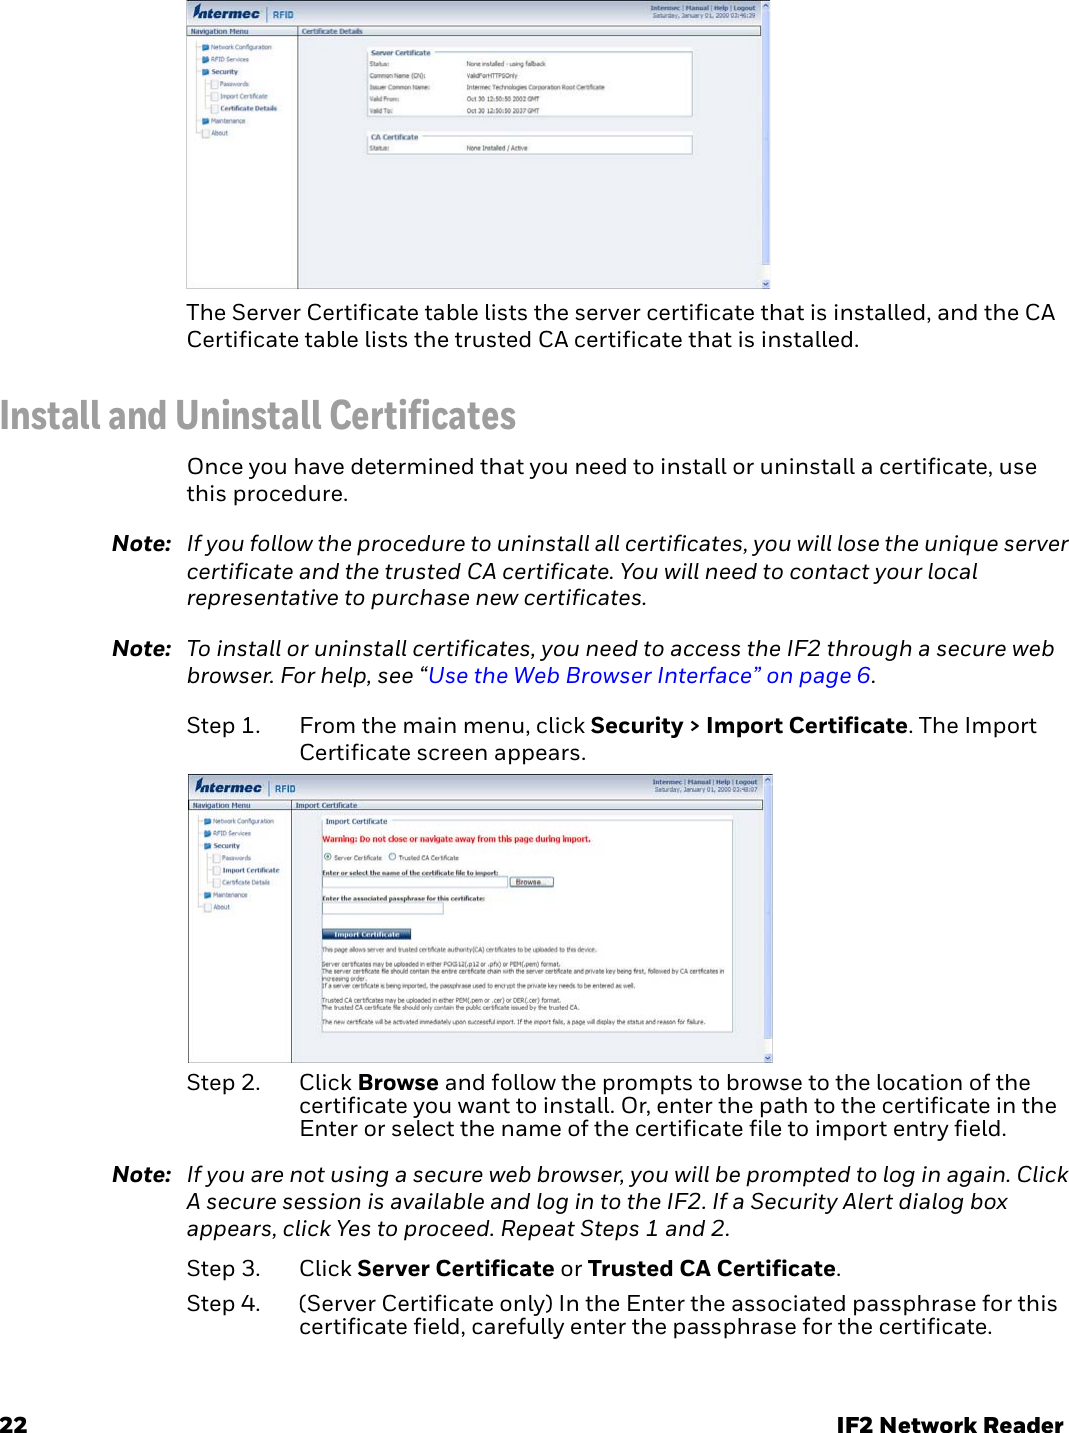 22 IF2 Network ReaderThe Server Certificate table lists the server certificate that is installed, and the CA Certificate table lists the trusted CA certificate that is installed.Install and Uninstall CertificatesOnce you have determined that you need to install or uninstall a certificate, use this procedure.Note: If you follow the procedure to uninstall all certificates, you will lose the unique server certificate and the trusted CA certificate. You will need to contact your local representative to purchase new certificates.Note: To install or uninstall certificates, you need to access the IF2 through a secure web browser. For help, see “Use the Web Browser Interface” on page 6.Step 1. From the main menu, click Security &gt; Import Certificate. The Import Certificate screen appears.Step 2. Click Browse and follow the prompts to browse to the location of the certificate you want to install. Or, enter the path to the certificate in the Enter or select the name of the certificate file to import entry field.Note: If you are not using a secure web browser, you will be prompted to log in again. Click A secure session is available and log in to the IF2. If a Security Alert dialog box appears, click Yes to proceed. Repeat Steps 1 and 2.Step 3. Click Server Certificate or Trusted CA Certificate.Step 4. (Server Certificate only) In the Enter the associated passphrase for this certificate field, carefully enter the passphrase for the certificate.